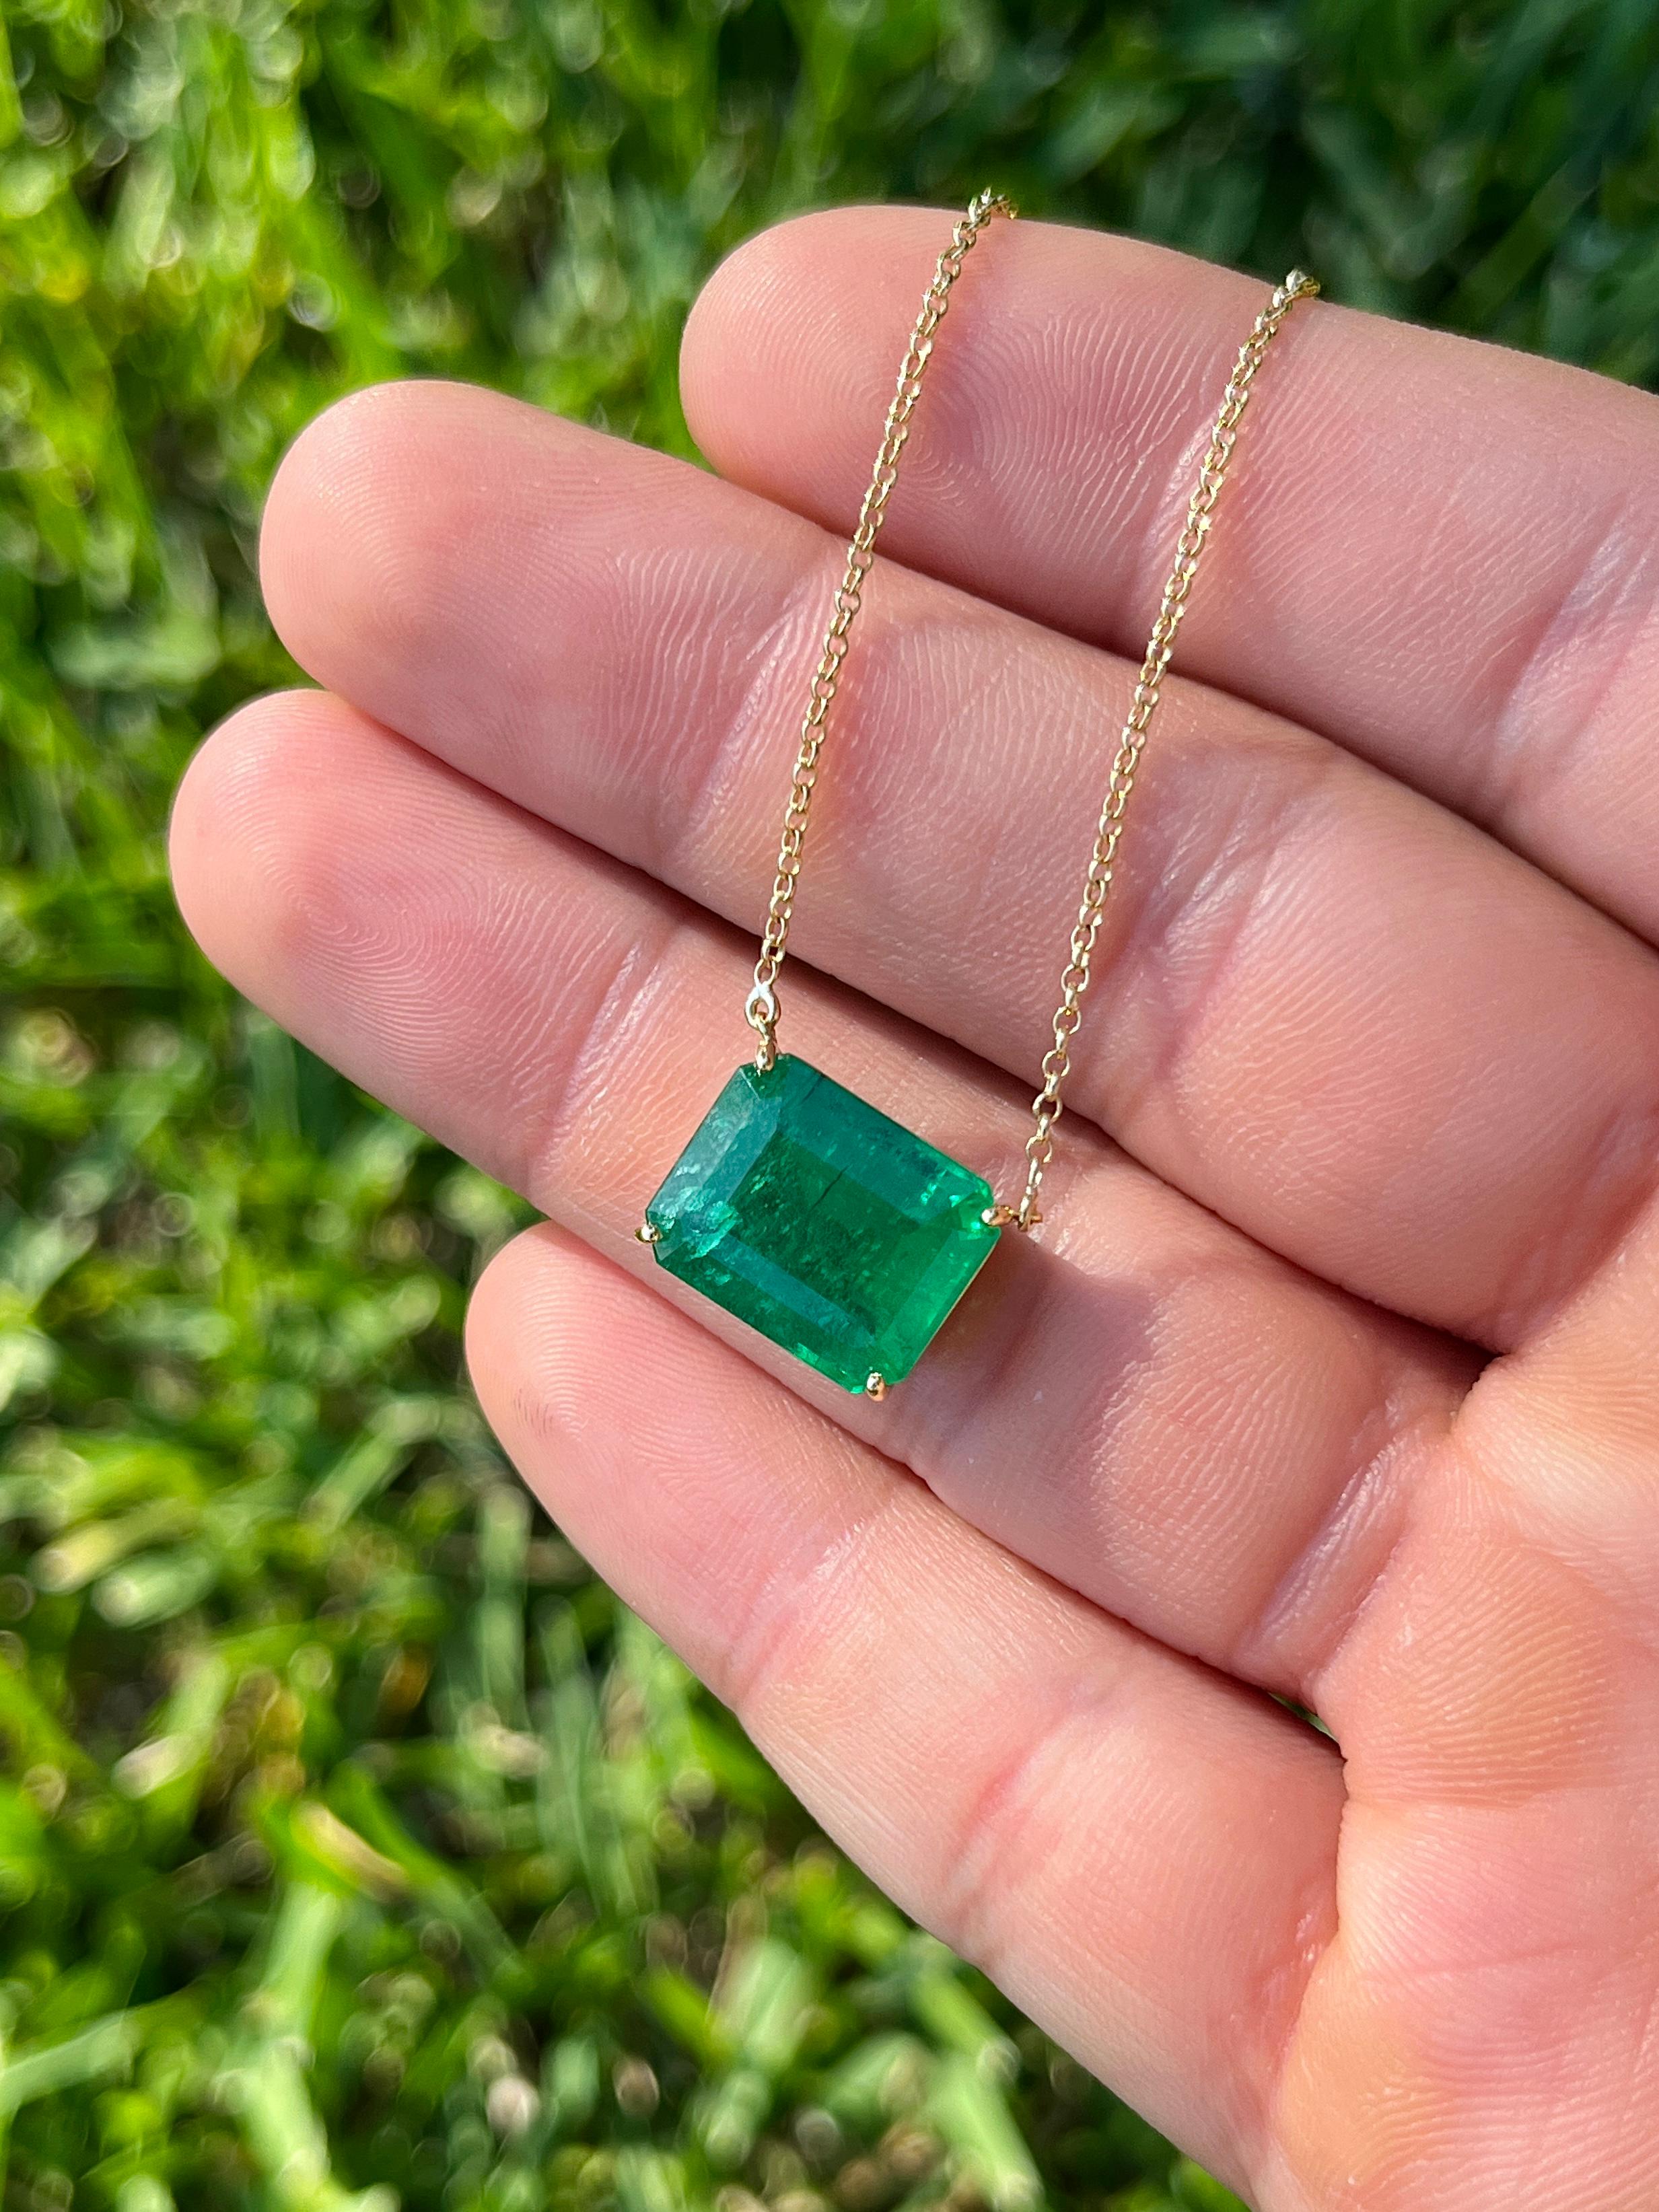 Emerald Cut 8.67 Carat Vivid Green Colombian Emerald Solitaire Pendant Necklace in 18K Gold For Sale